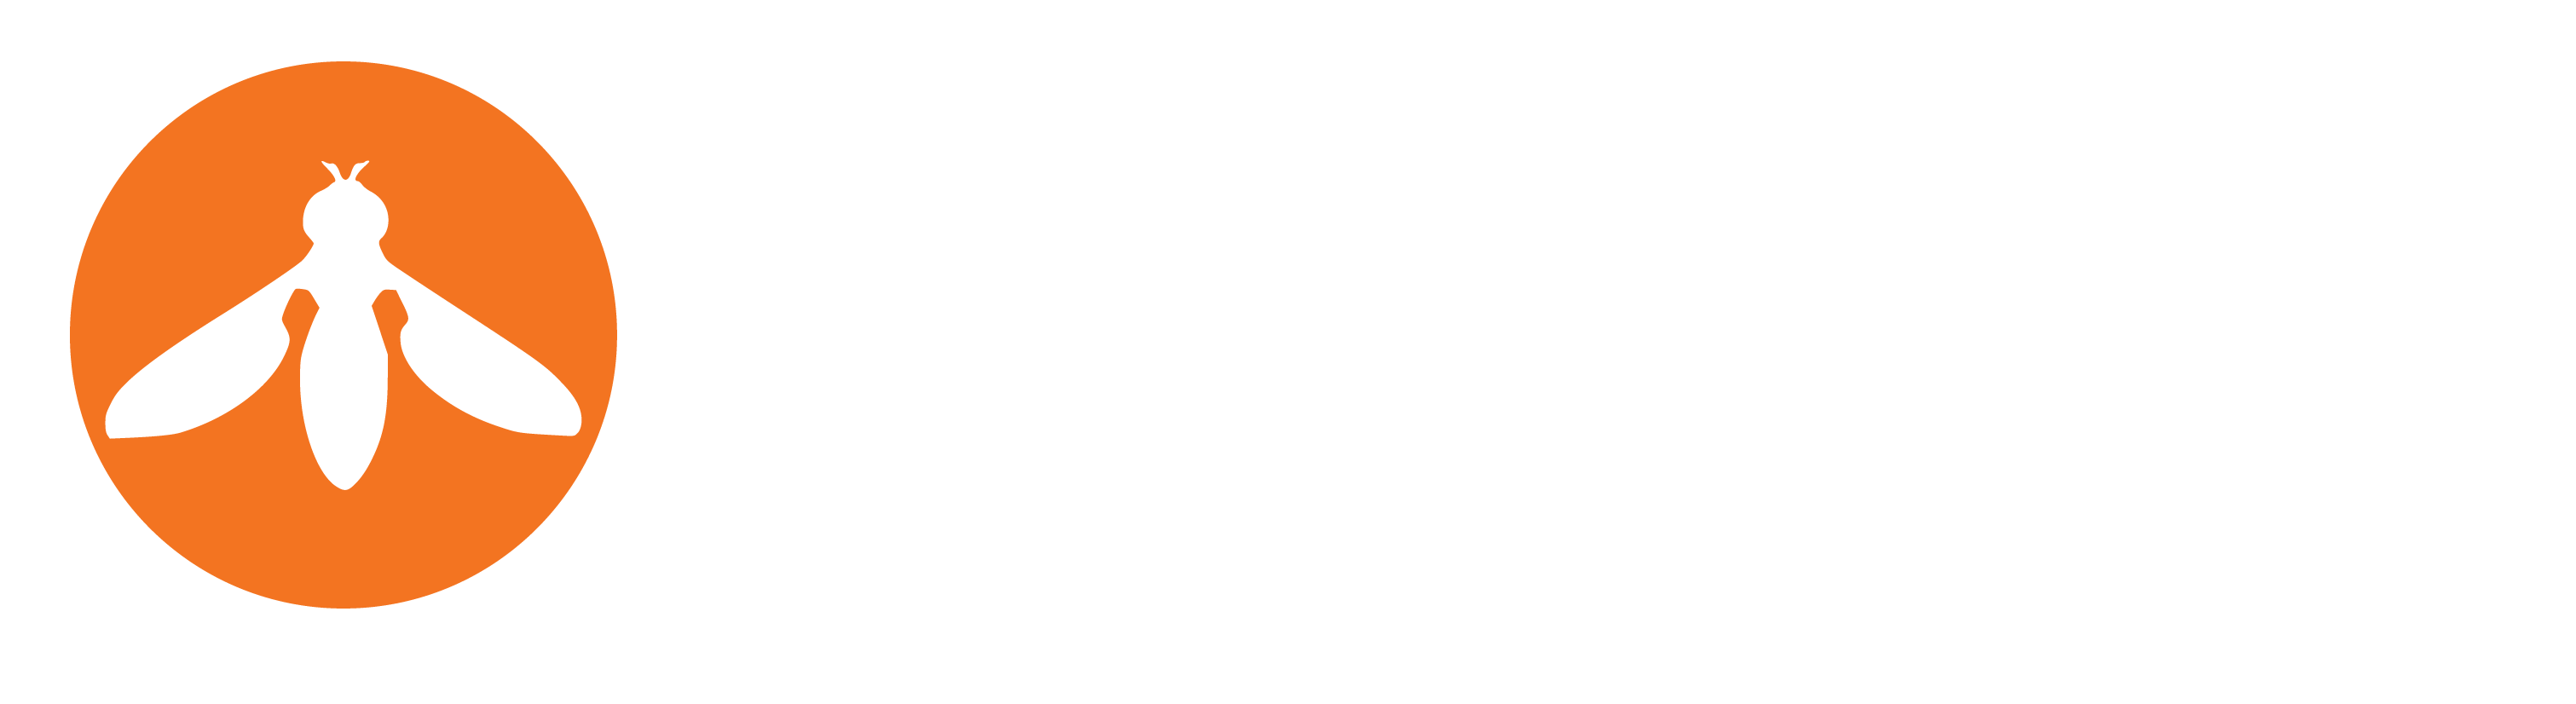 Hoverfly Technologies